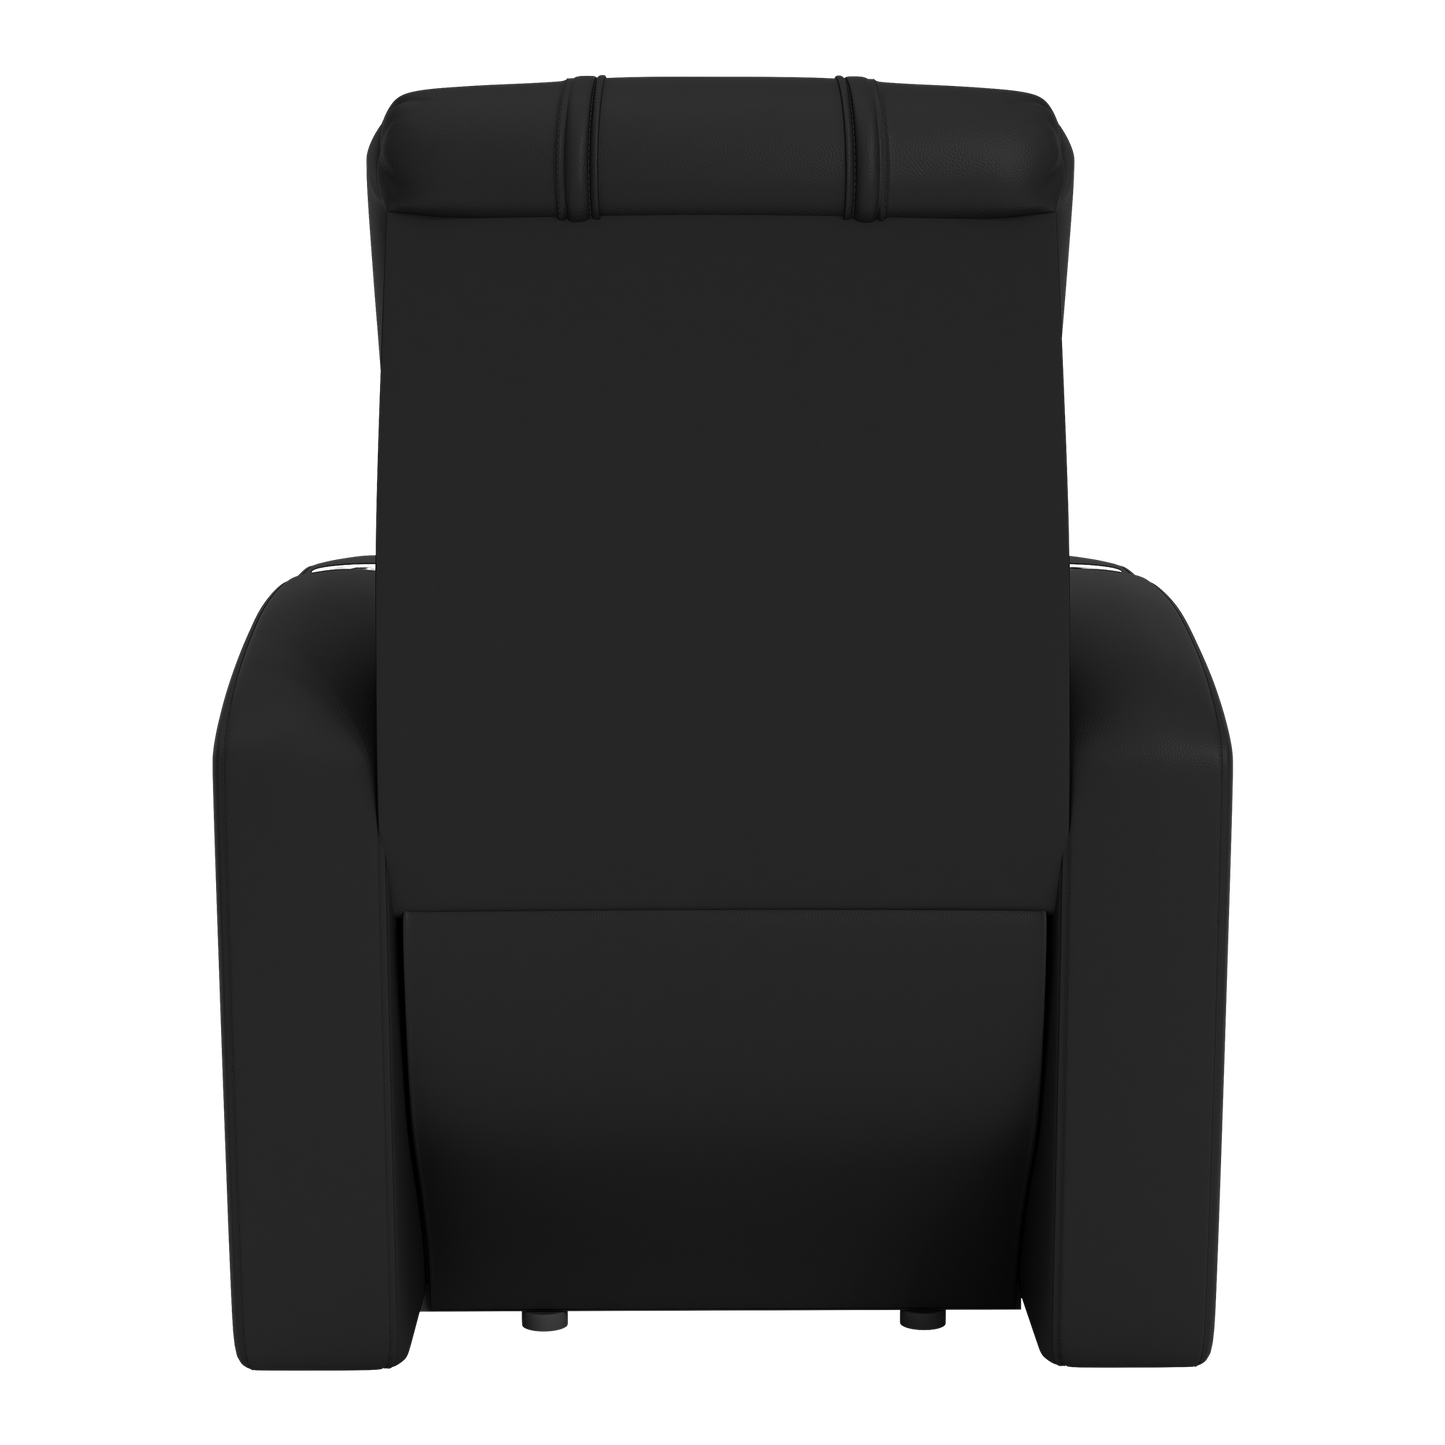 Stealth Recliner with Kansas City Royals 2015 Champions